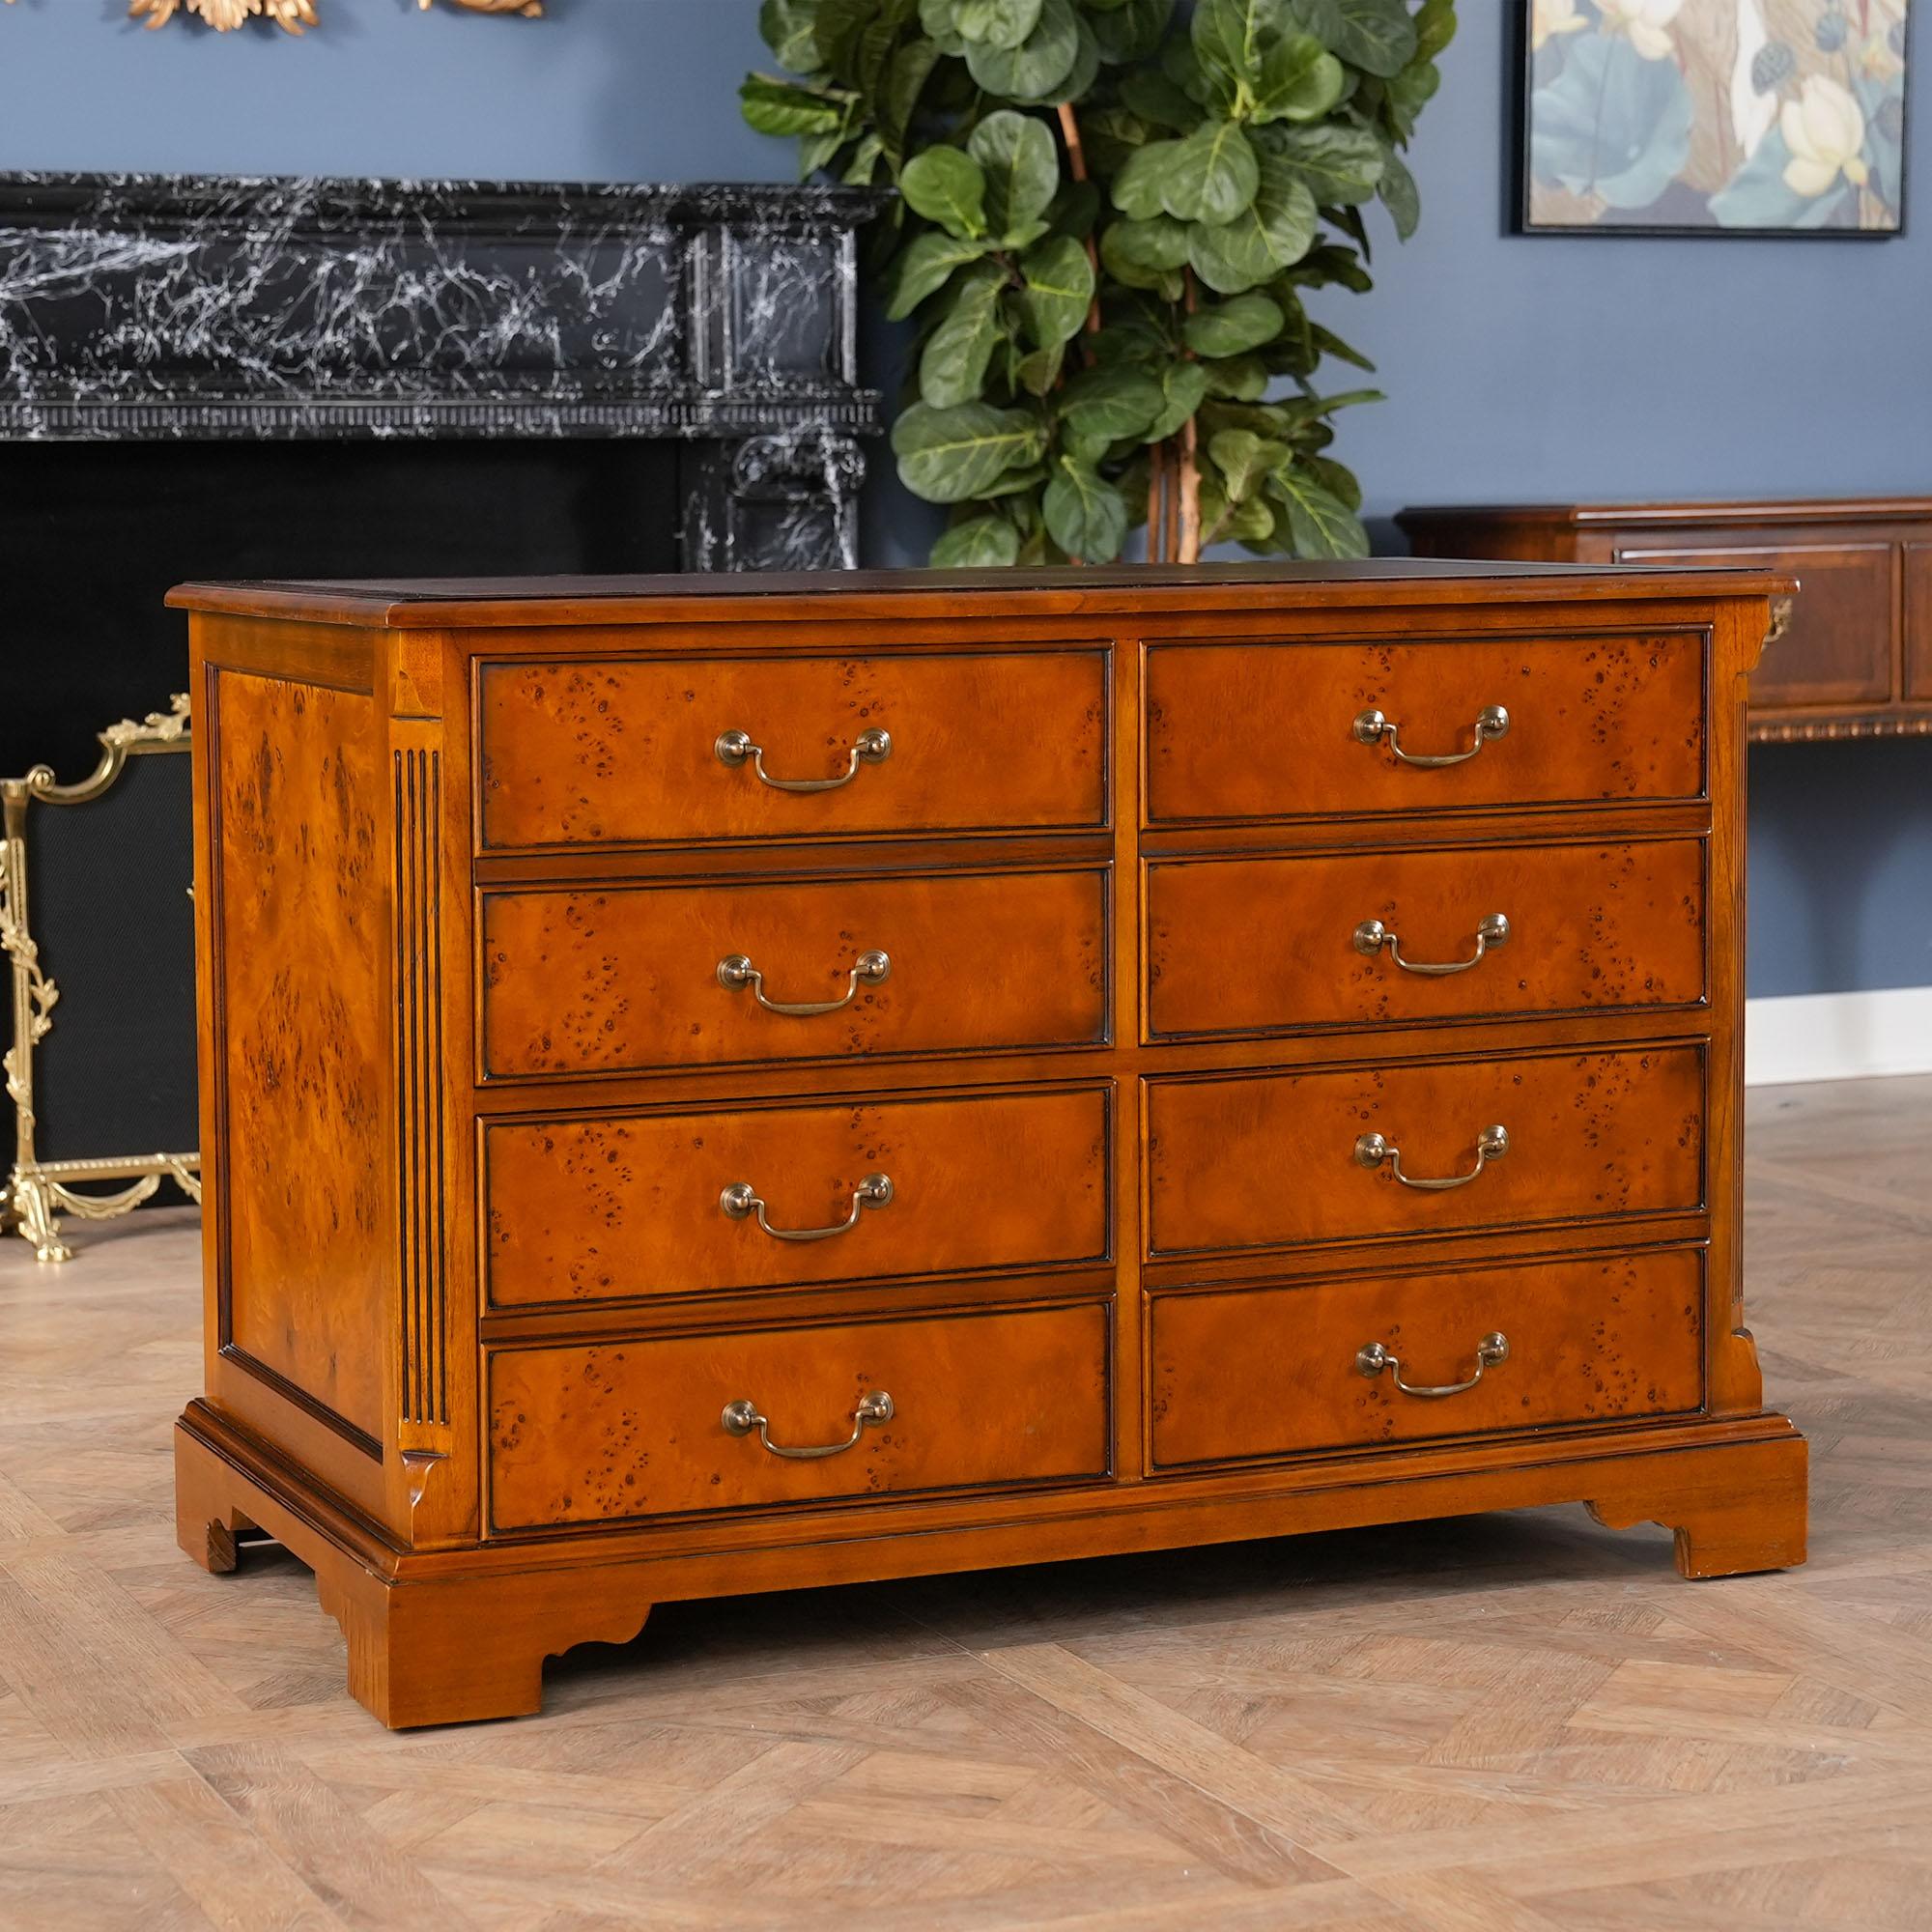 A highly functional and decorative piece this Country Estate Four Drawer File cabinet from Niagara Furniture is made with fine quality burled wood. The top of the cabinet is covered in a full grain brown leather panel which is attractively tooled